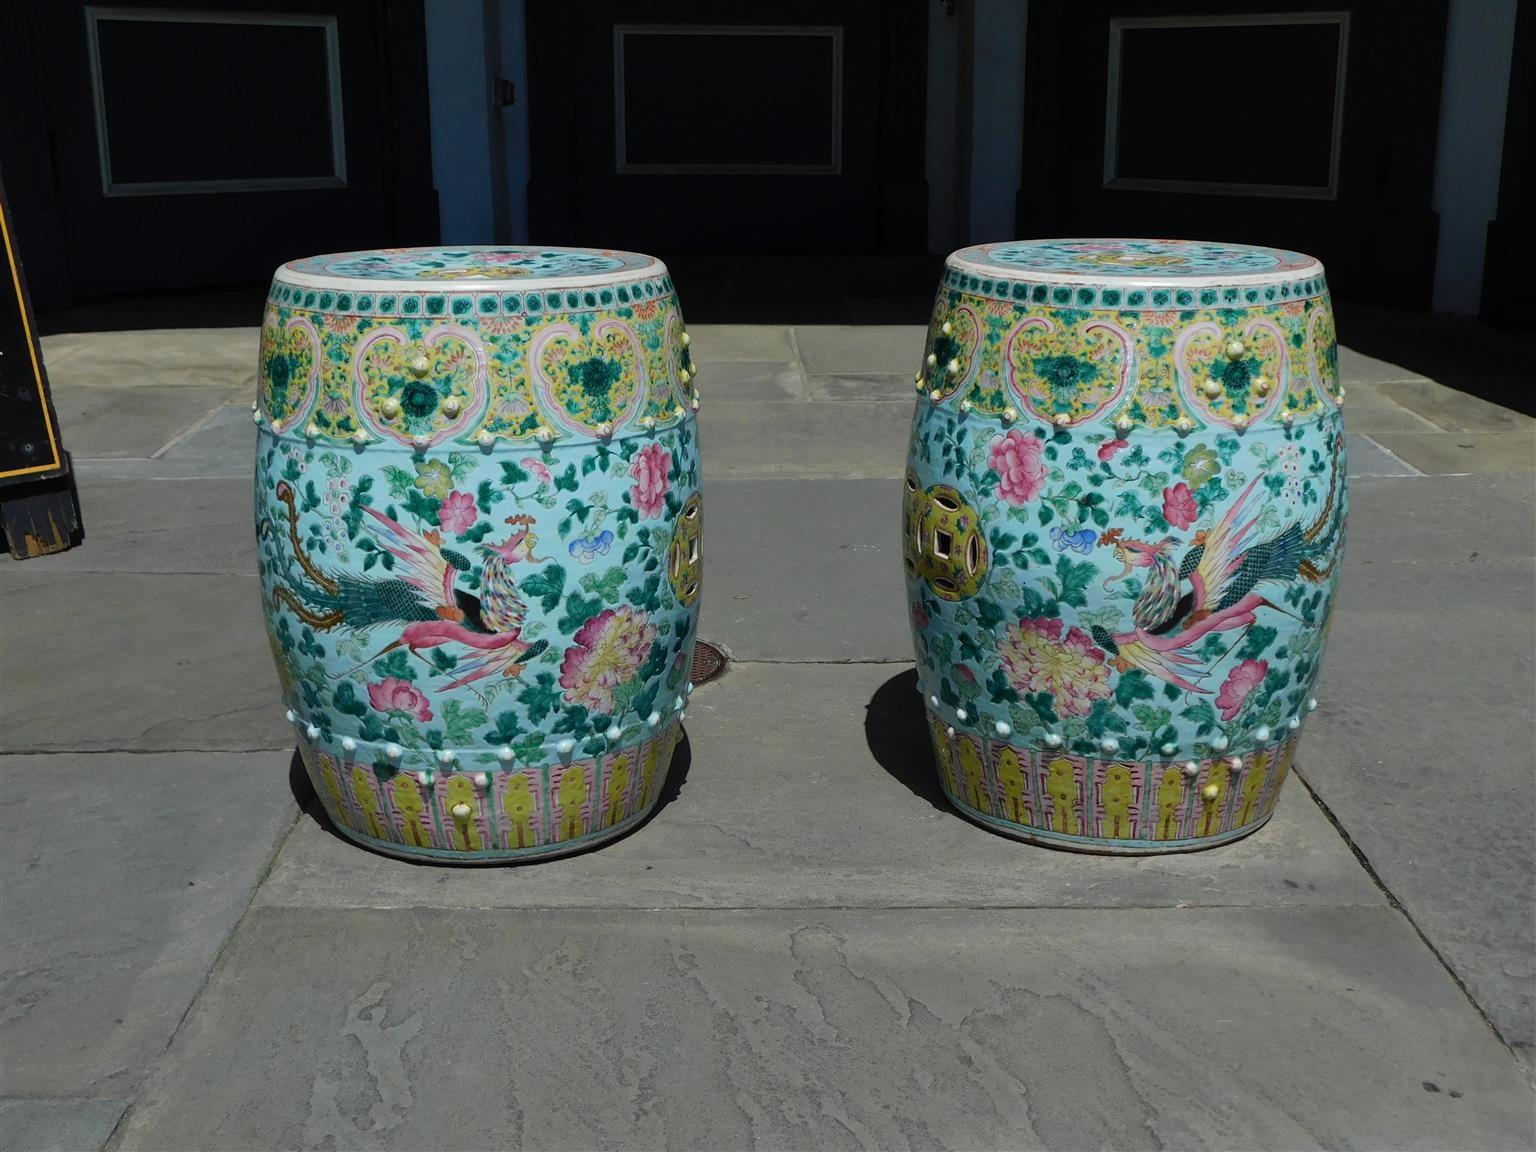 Pair of Chinese porcelain decorative painted foliage garden seats with flanking dragons, exotic birds, exterior bead work, and circular fret work, Early 19th century. Each seat measures 19